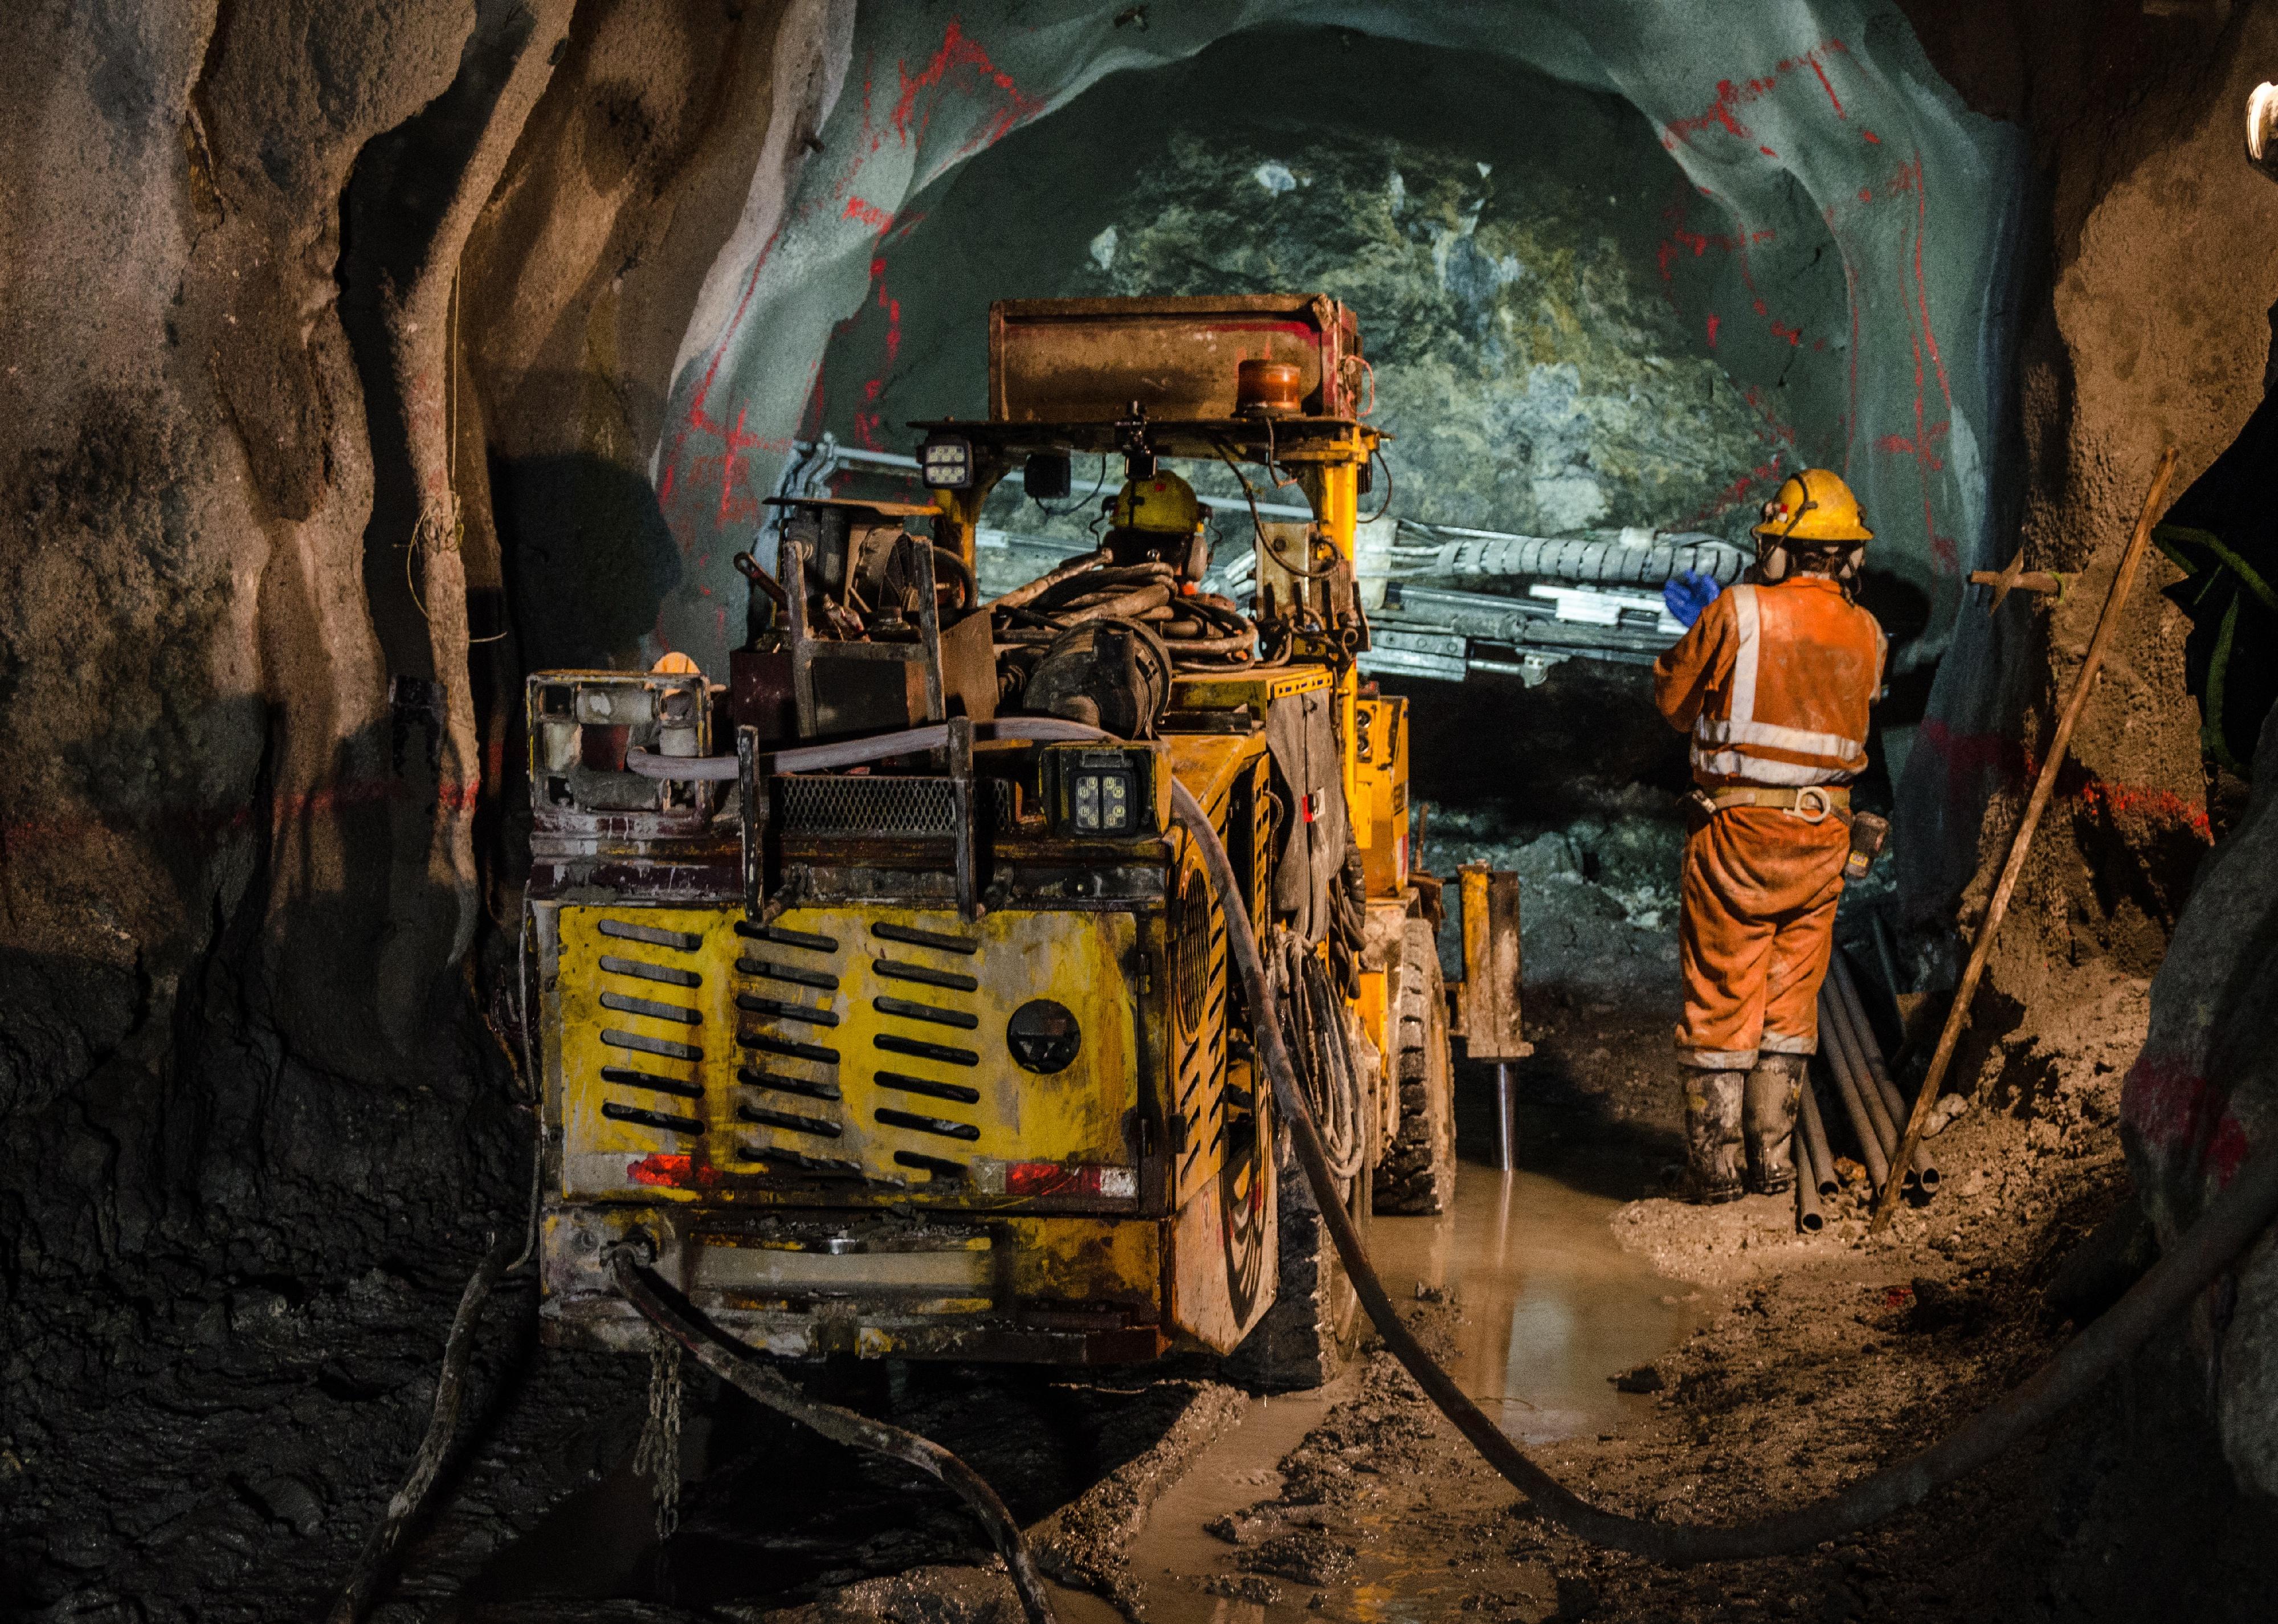 Workers operating heavy machinery in a mine